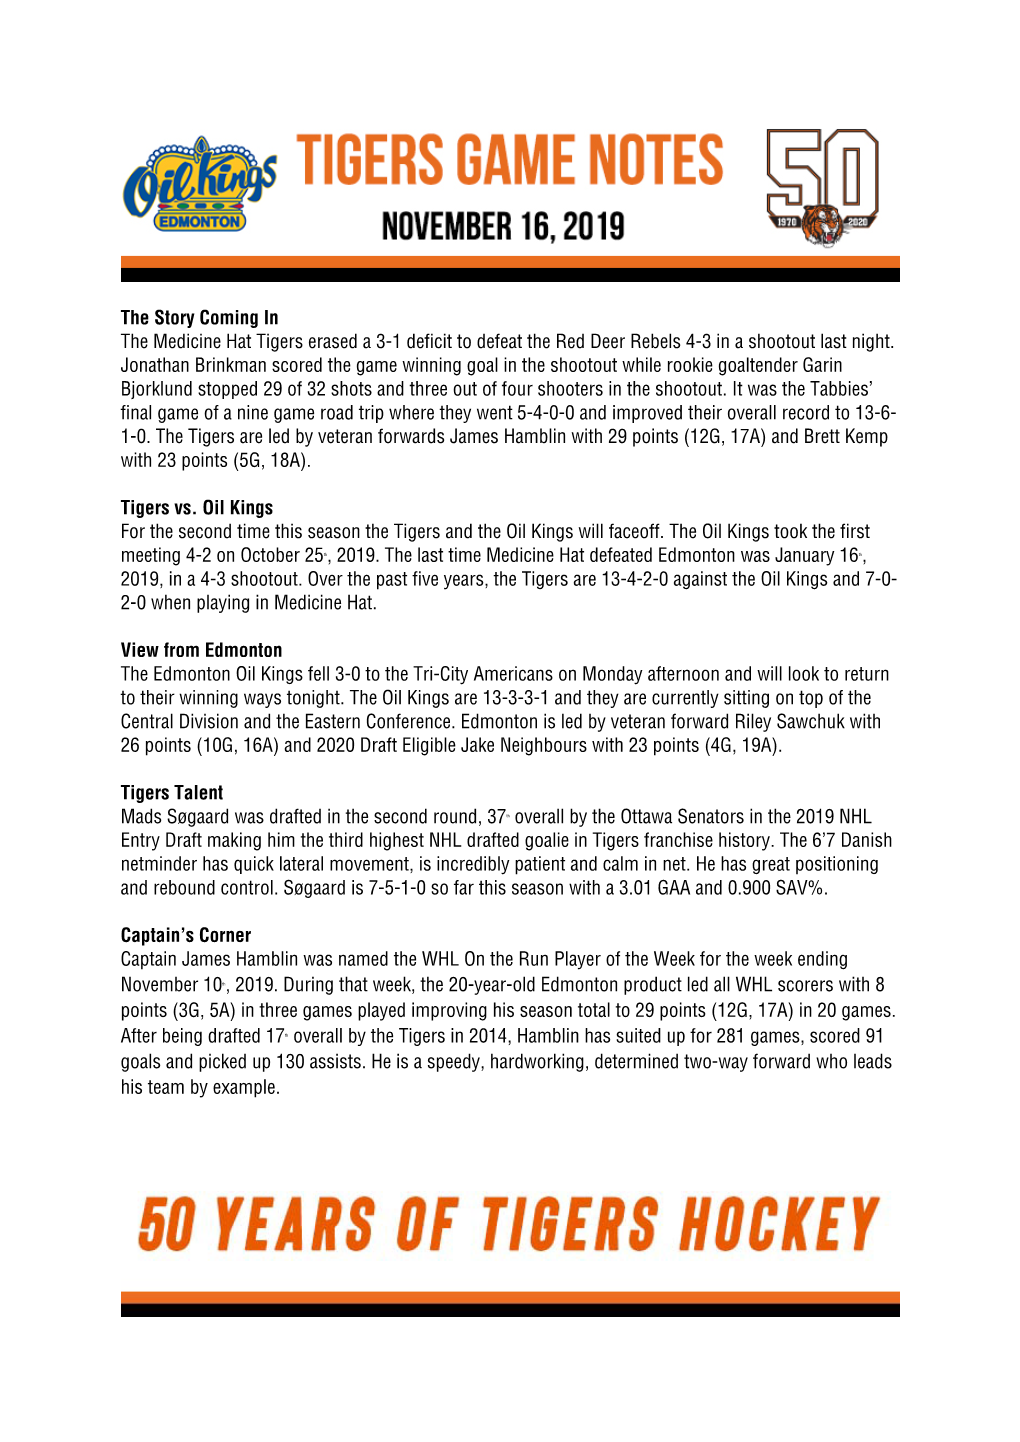 The Story Coming in the Medicine Hat Tigers Erased a 3-1 Deficit to Defeat the Red Deer Rebels 4-3 in a Shootout Last Night